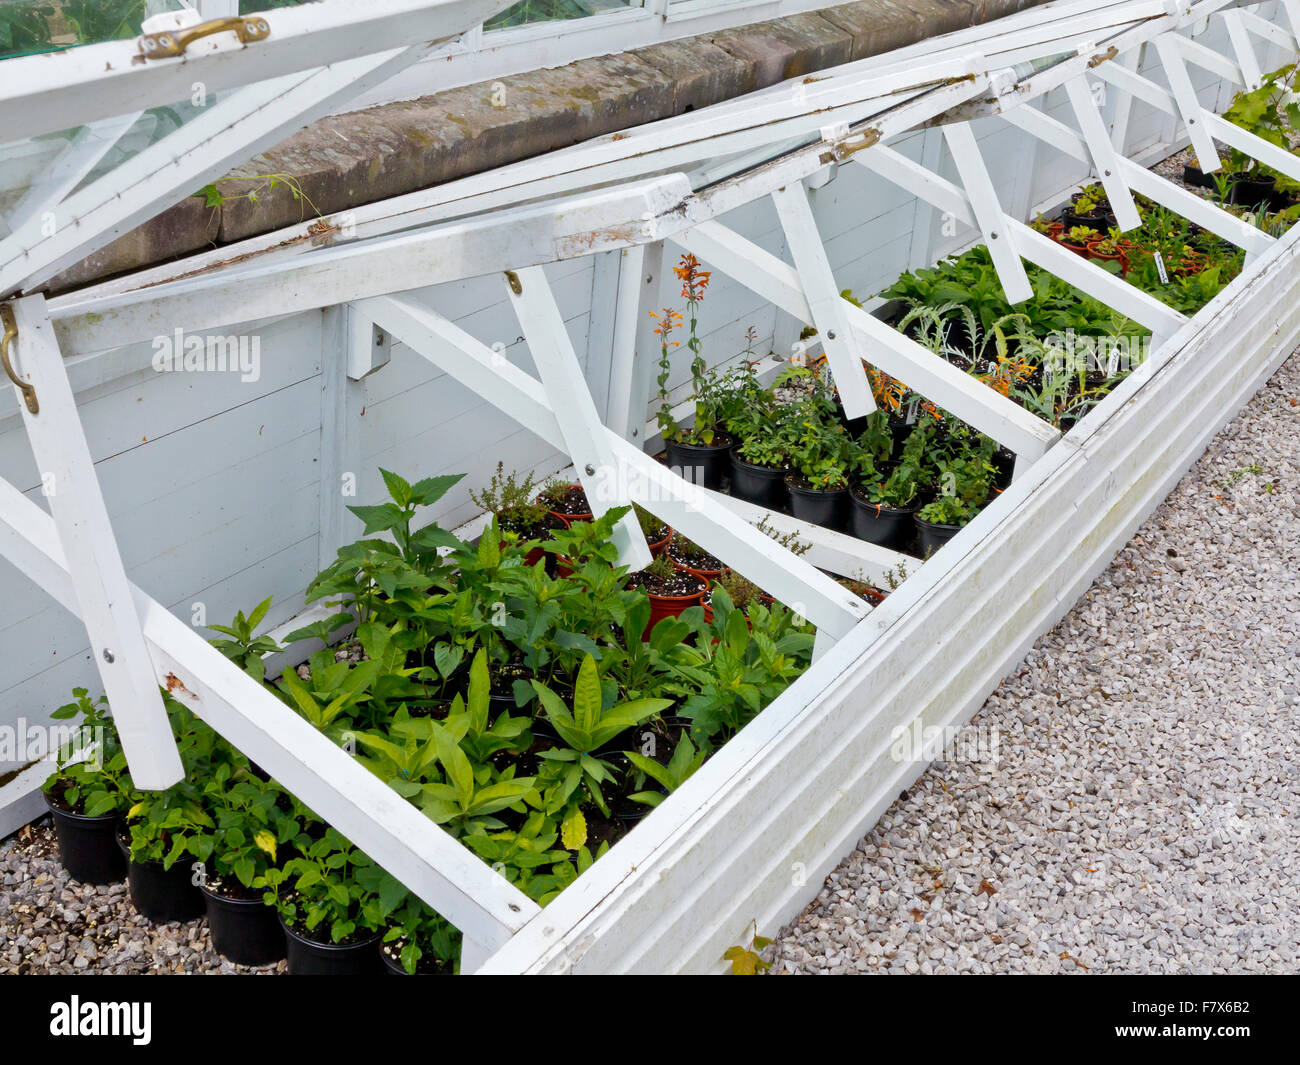 Plants growing in cold frame in a garden with glass cover raised for ventilation Stock Photo